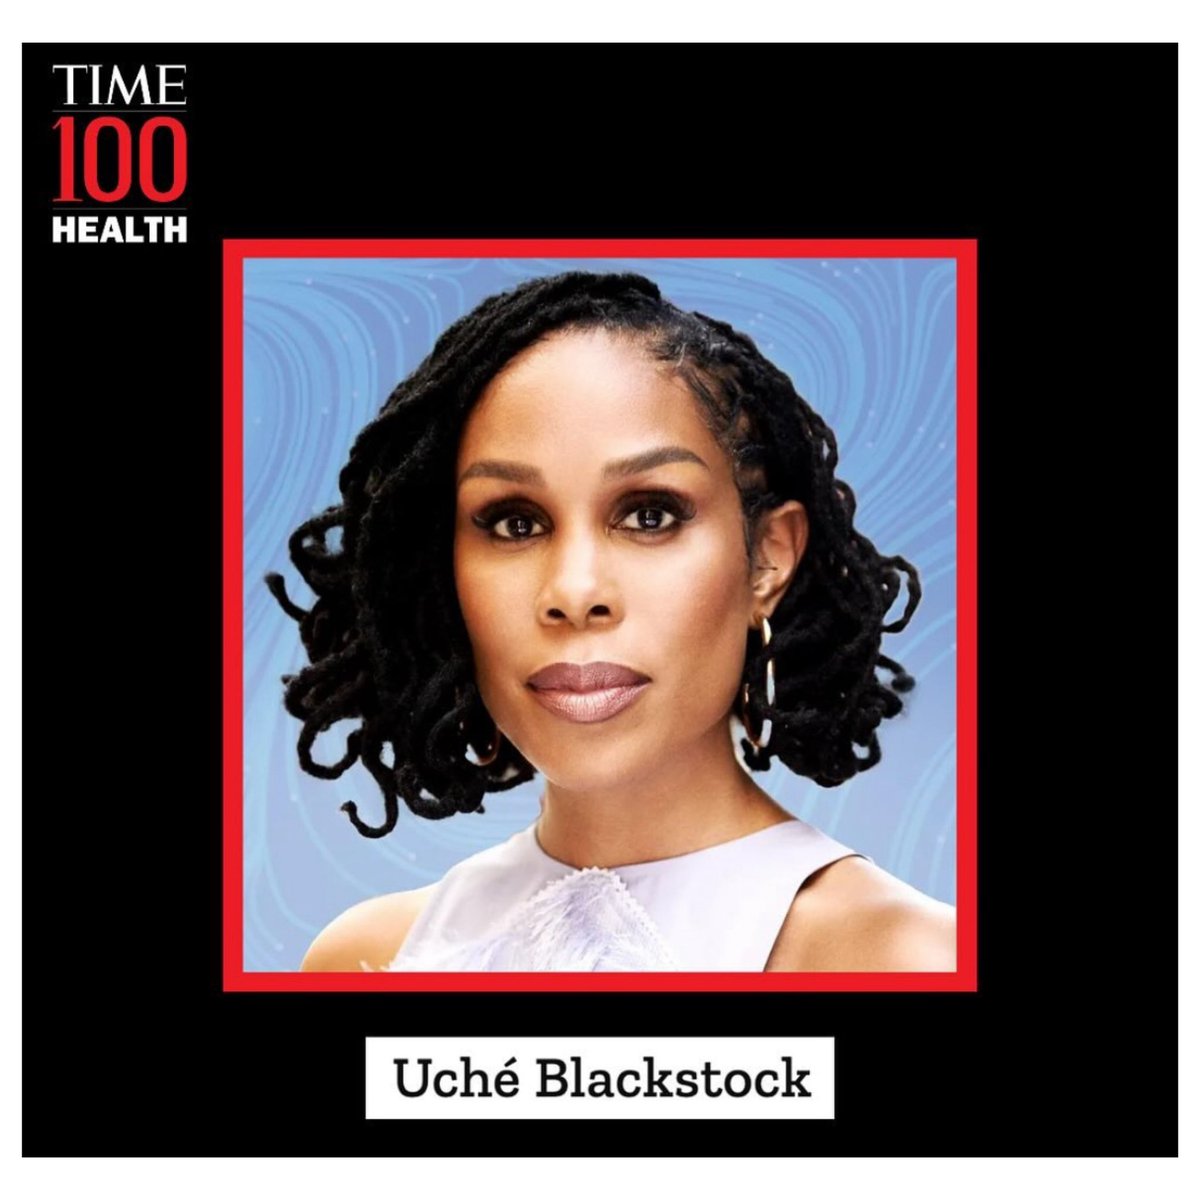 When I tell you that vision boards DO work, you better believe me! When I also tell you to take that leap of faith (even if you’re scared), you better! On the LEFT, part of my vision board from 2022. On the RIGHT, chosen as @TIME’s 100 Most Influential People in Health.